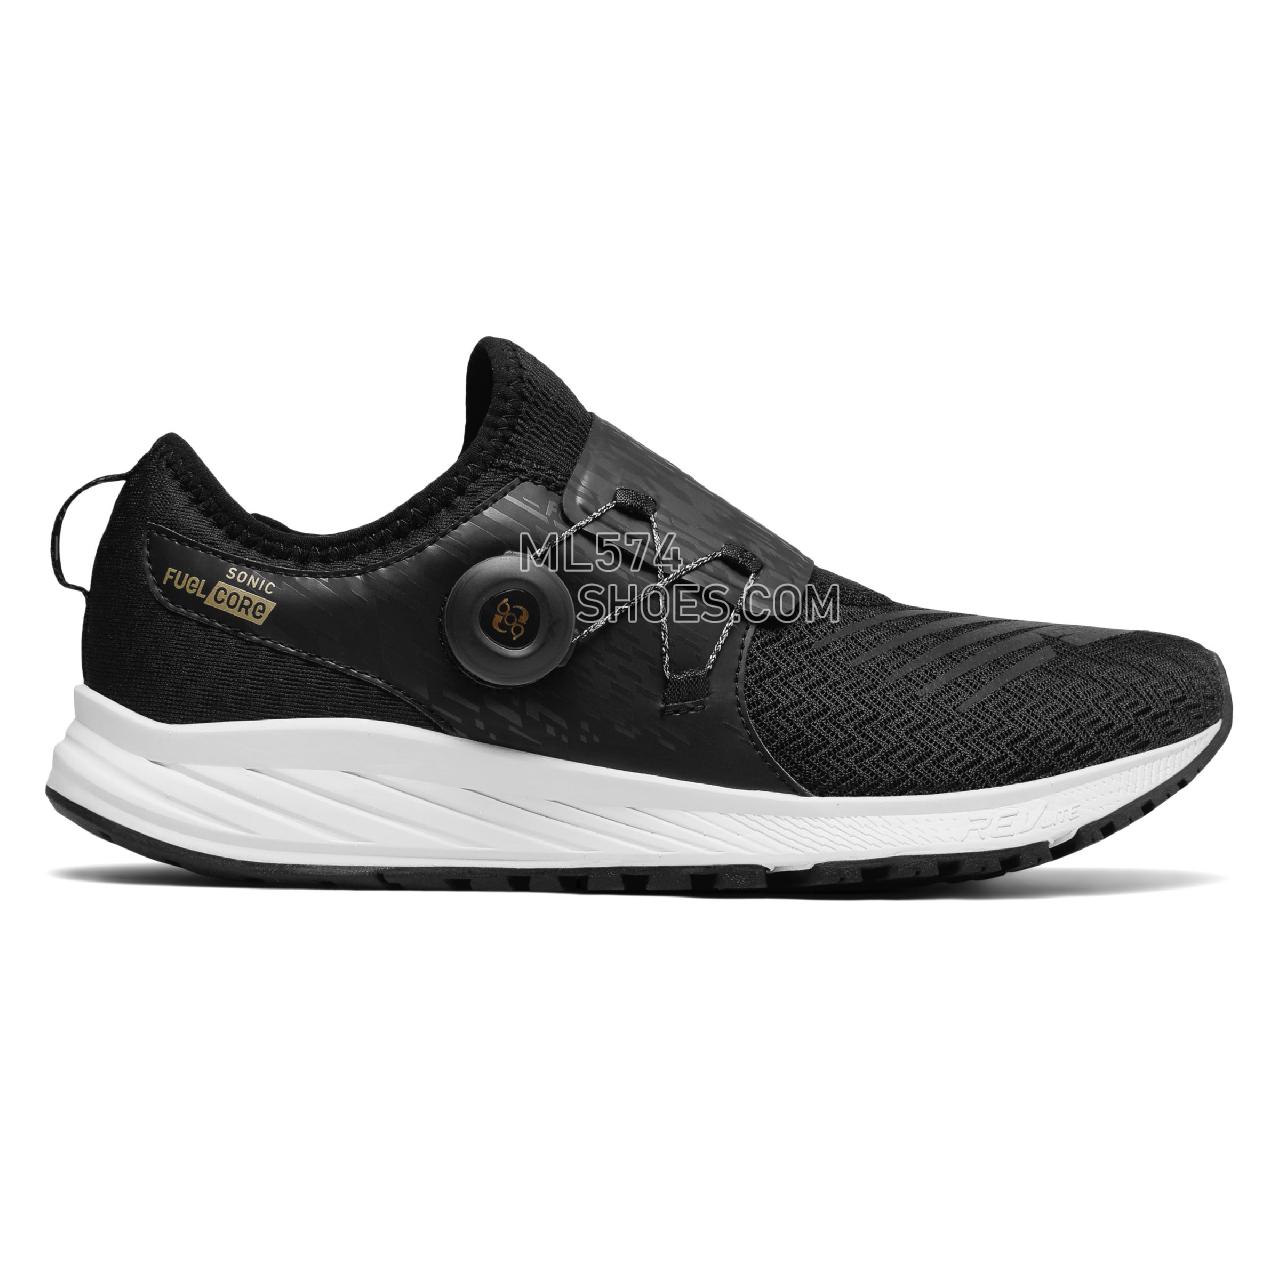 New Balance FuelCore Sonic - Men's  - Running Black with Gold and Thunder - MSONIBS